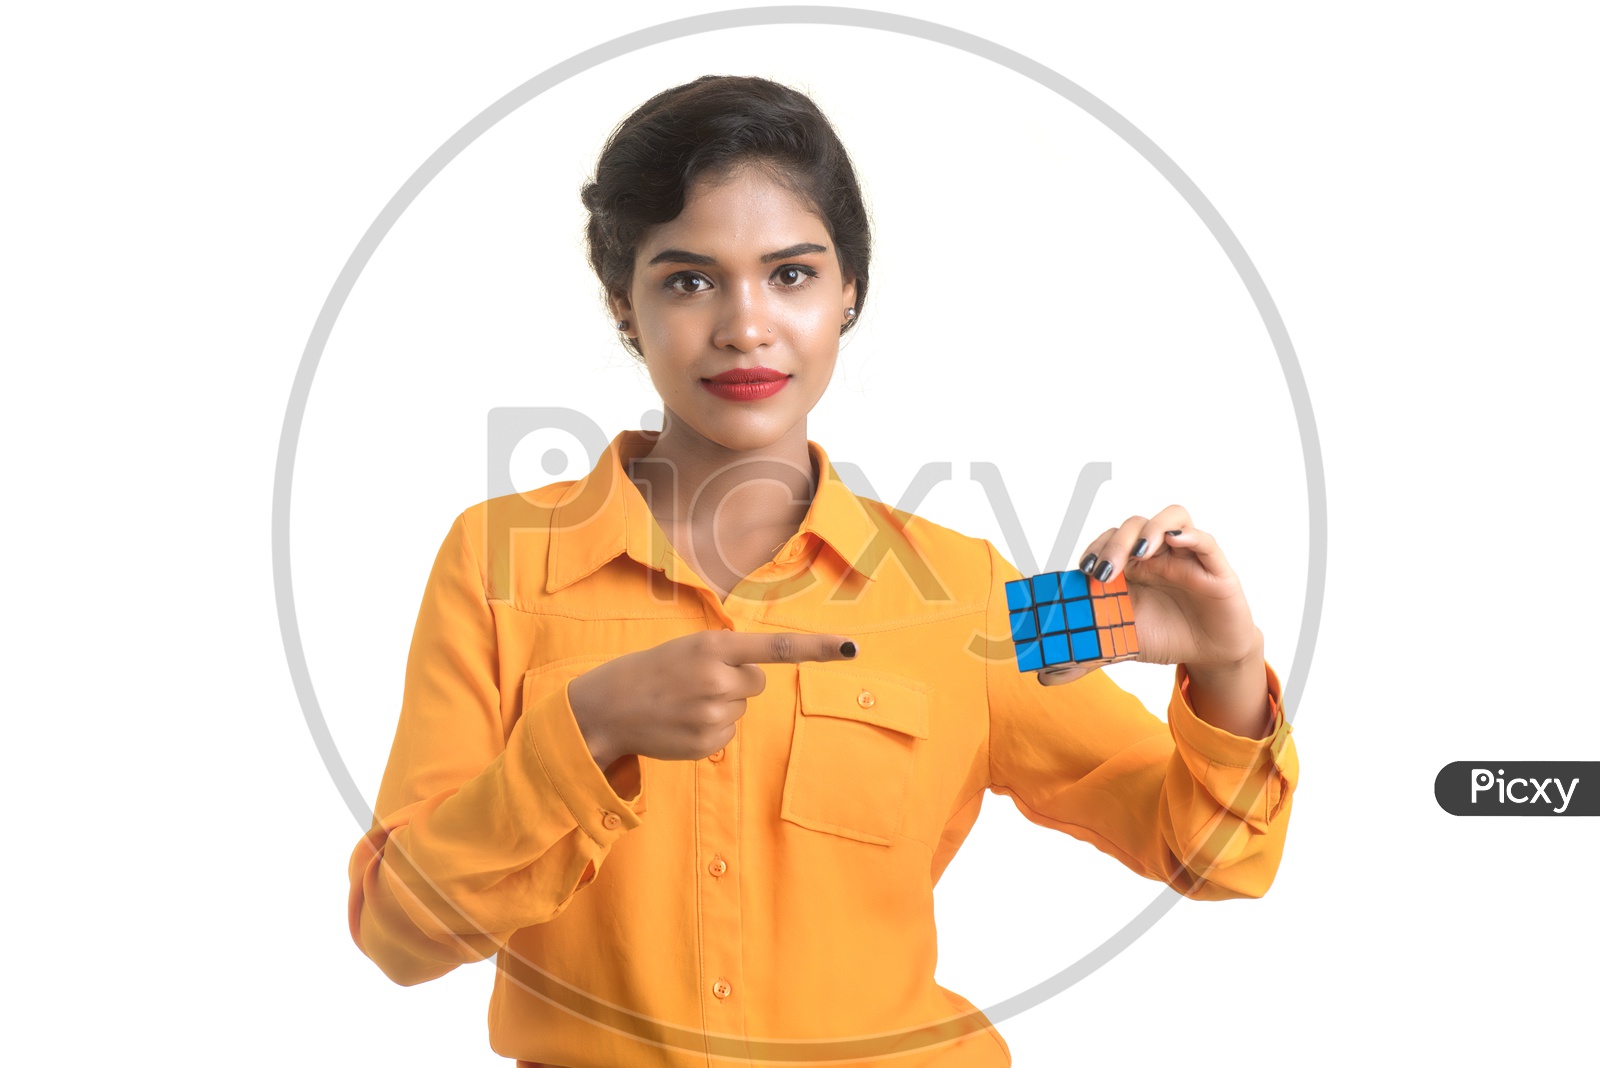 Young Beautiful Girl With a Smile  Expression On Her Face and Holding Rubik's cube in hand on an isolated White Background